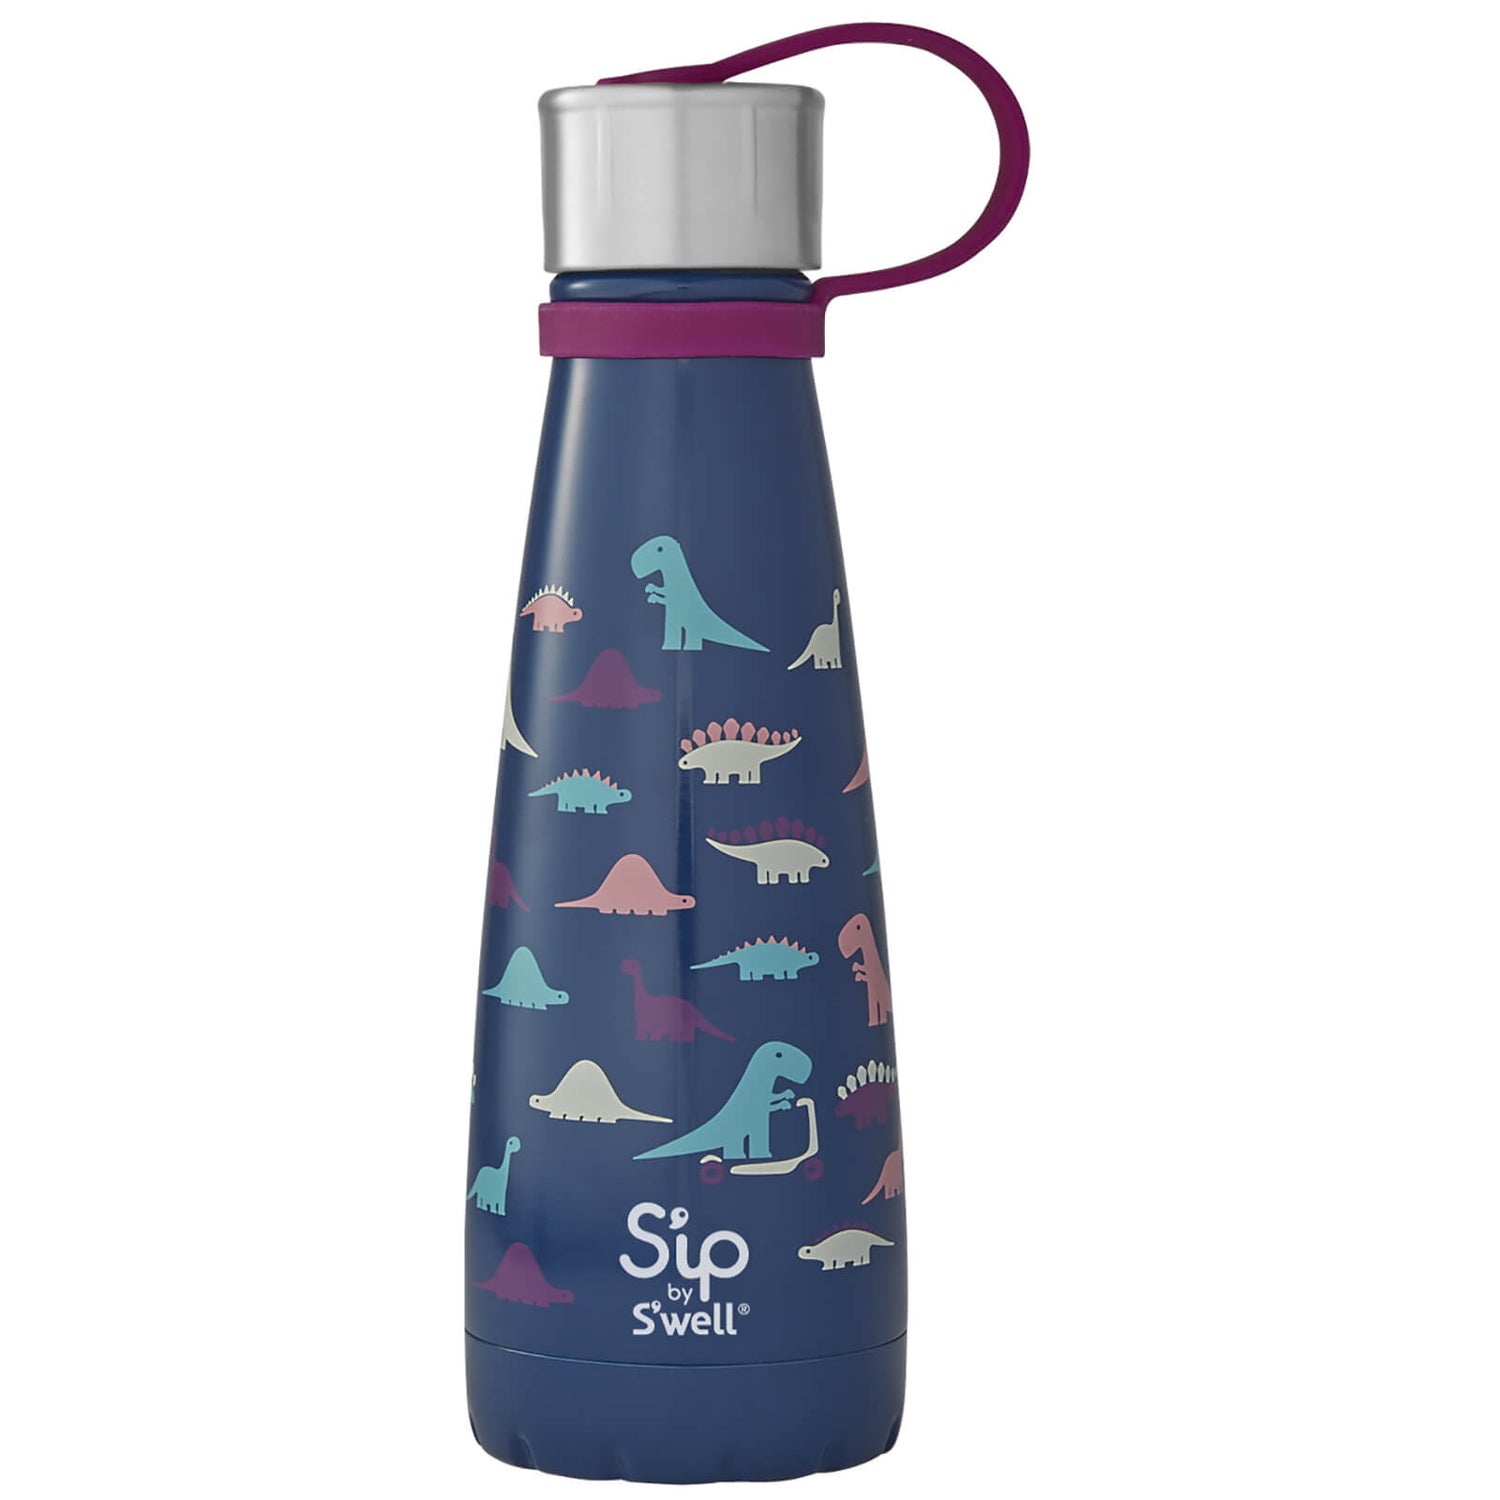 S'ip by S'well Dino Days Water Bottle 295ml